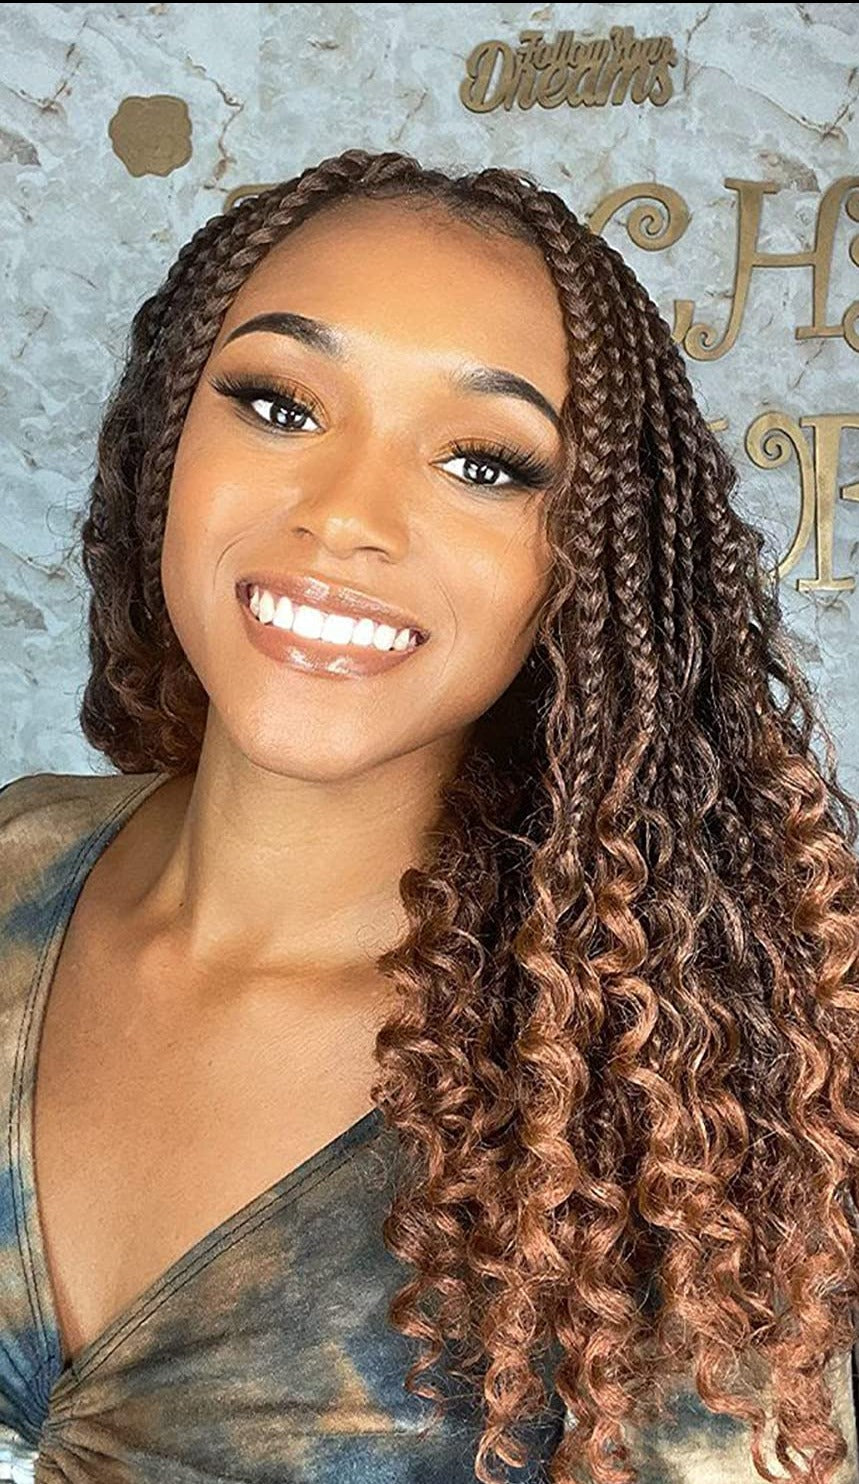 Ciara T30 Goddess Box Braids Crochet with Curly Ends Hair Extension